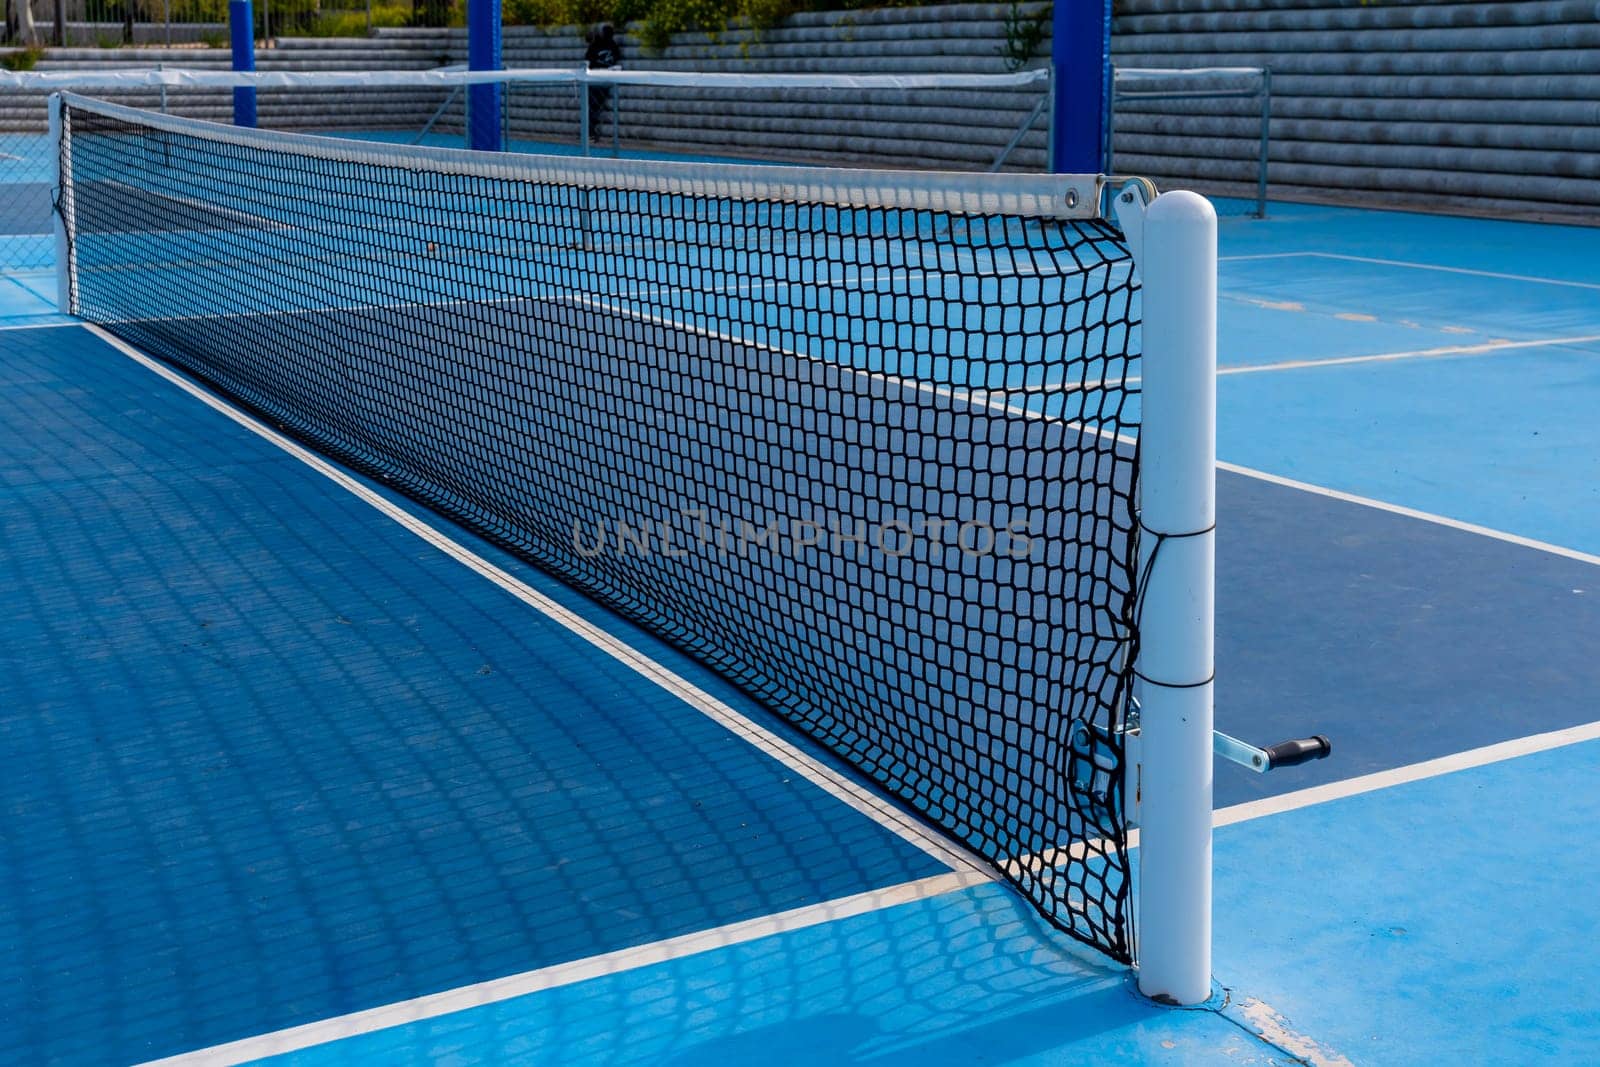 Pickleball net in a blue outdoor court wit no people by Huizi